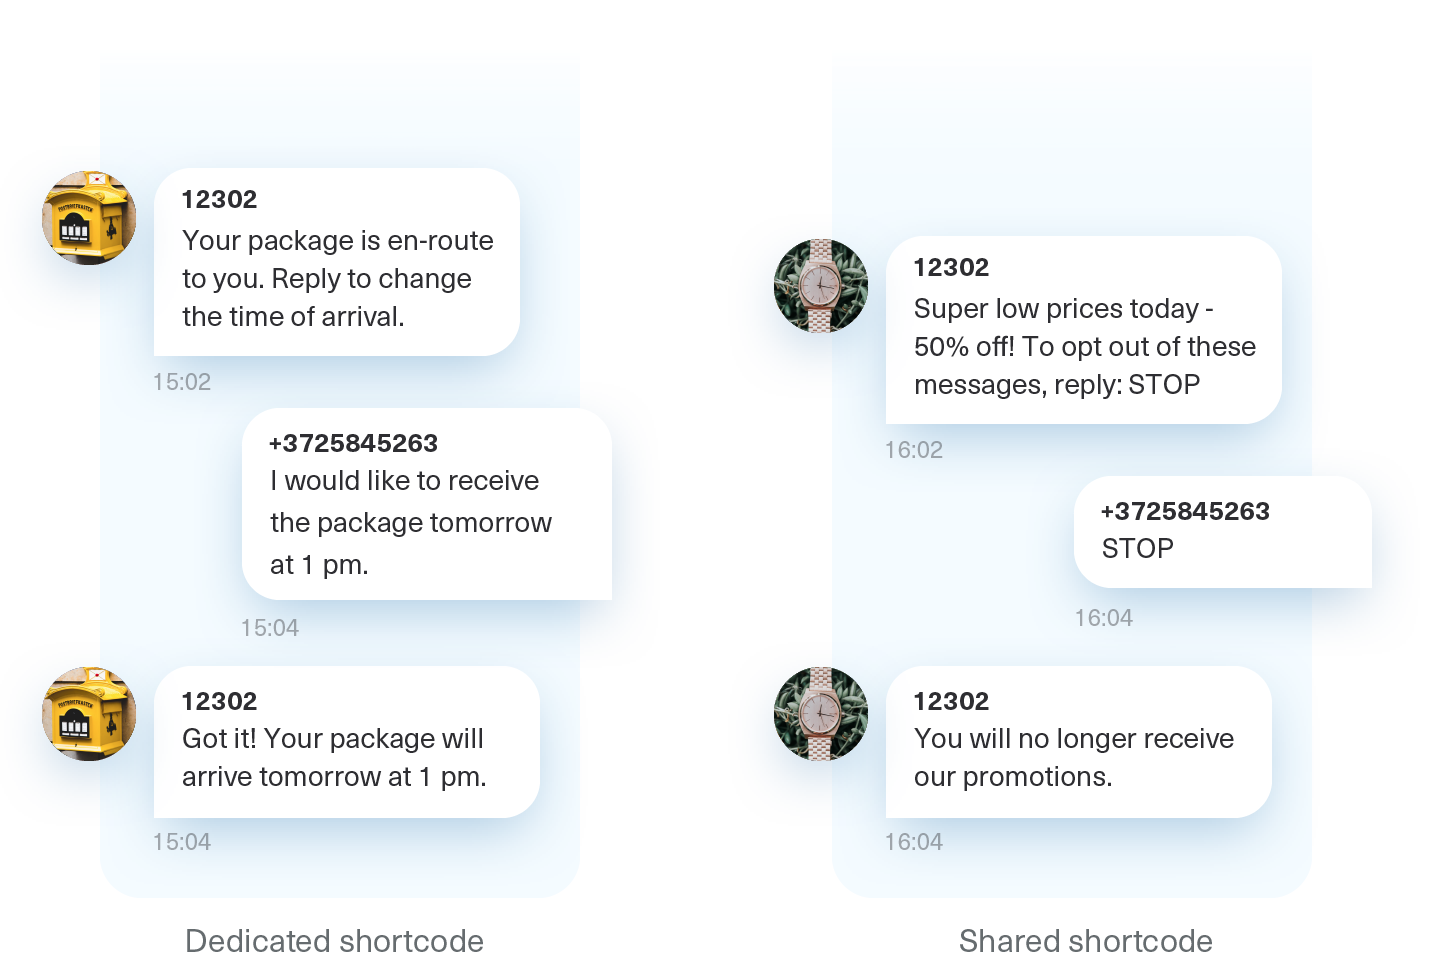 Examples of dedicated shortcode SMS sender IDs